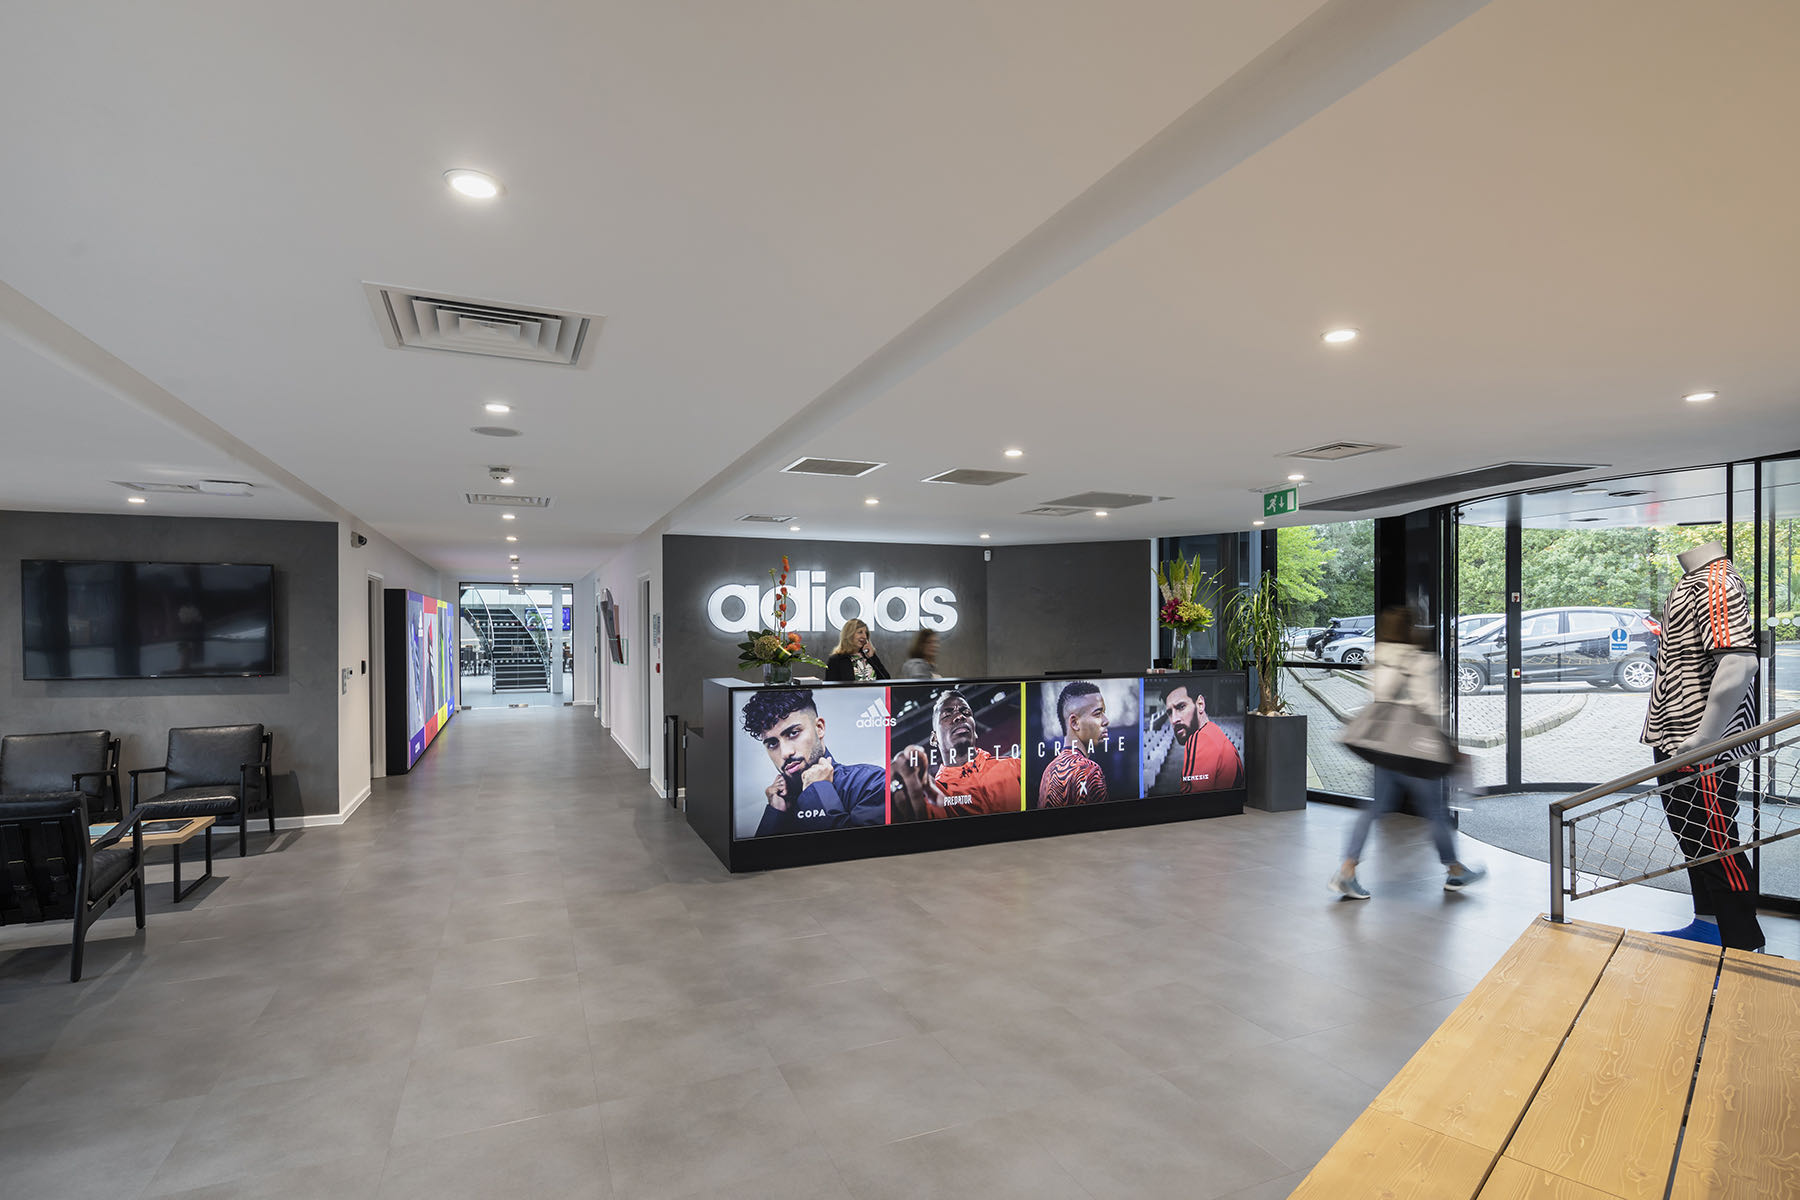 A Tour of Adidas' New Manchester Headquarters - Officelovin'